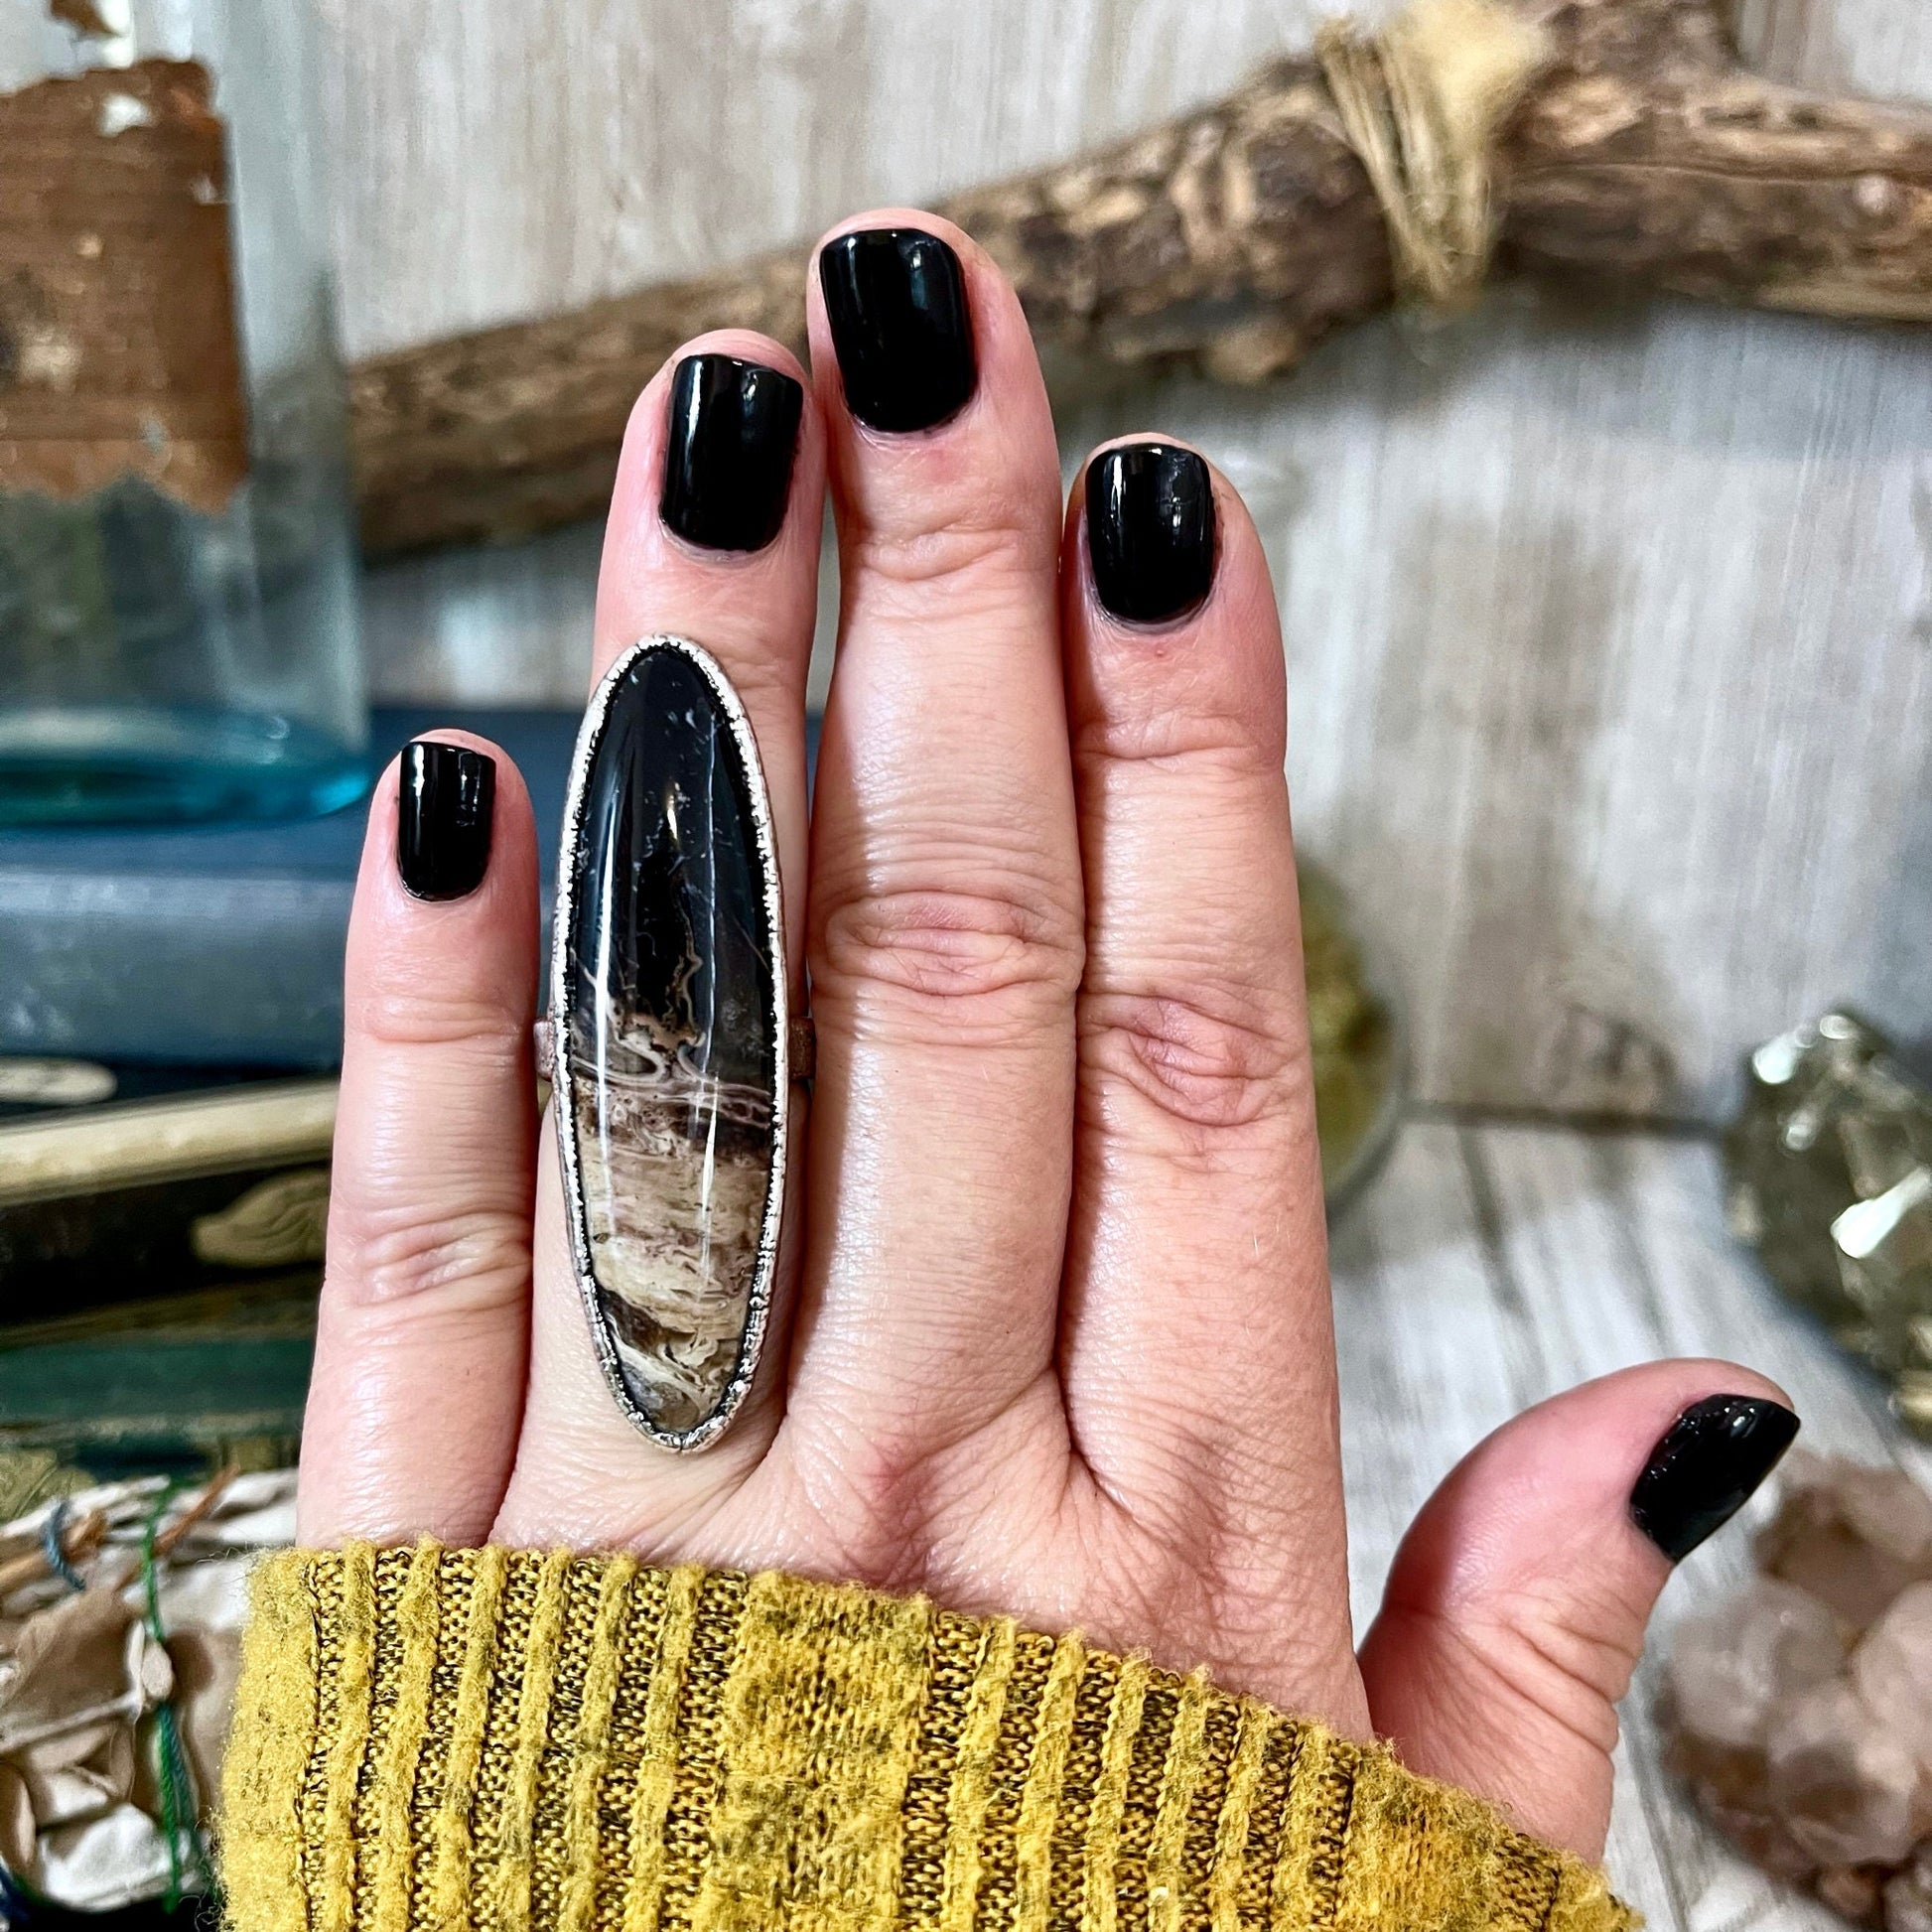 Big Bold Jewelry, Big Crystal Ring, Big Silver Ring, Big Stone Ring, Etsy ID: 1352850702, Fossilized Palm Root, FOXLARK- RINGS, Jewelry, Large Boho Ring, Large Crystal Ring, Large Stone Ring, Natural stone ring, Rings, silver crystal ring, Silver Stone Je